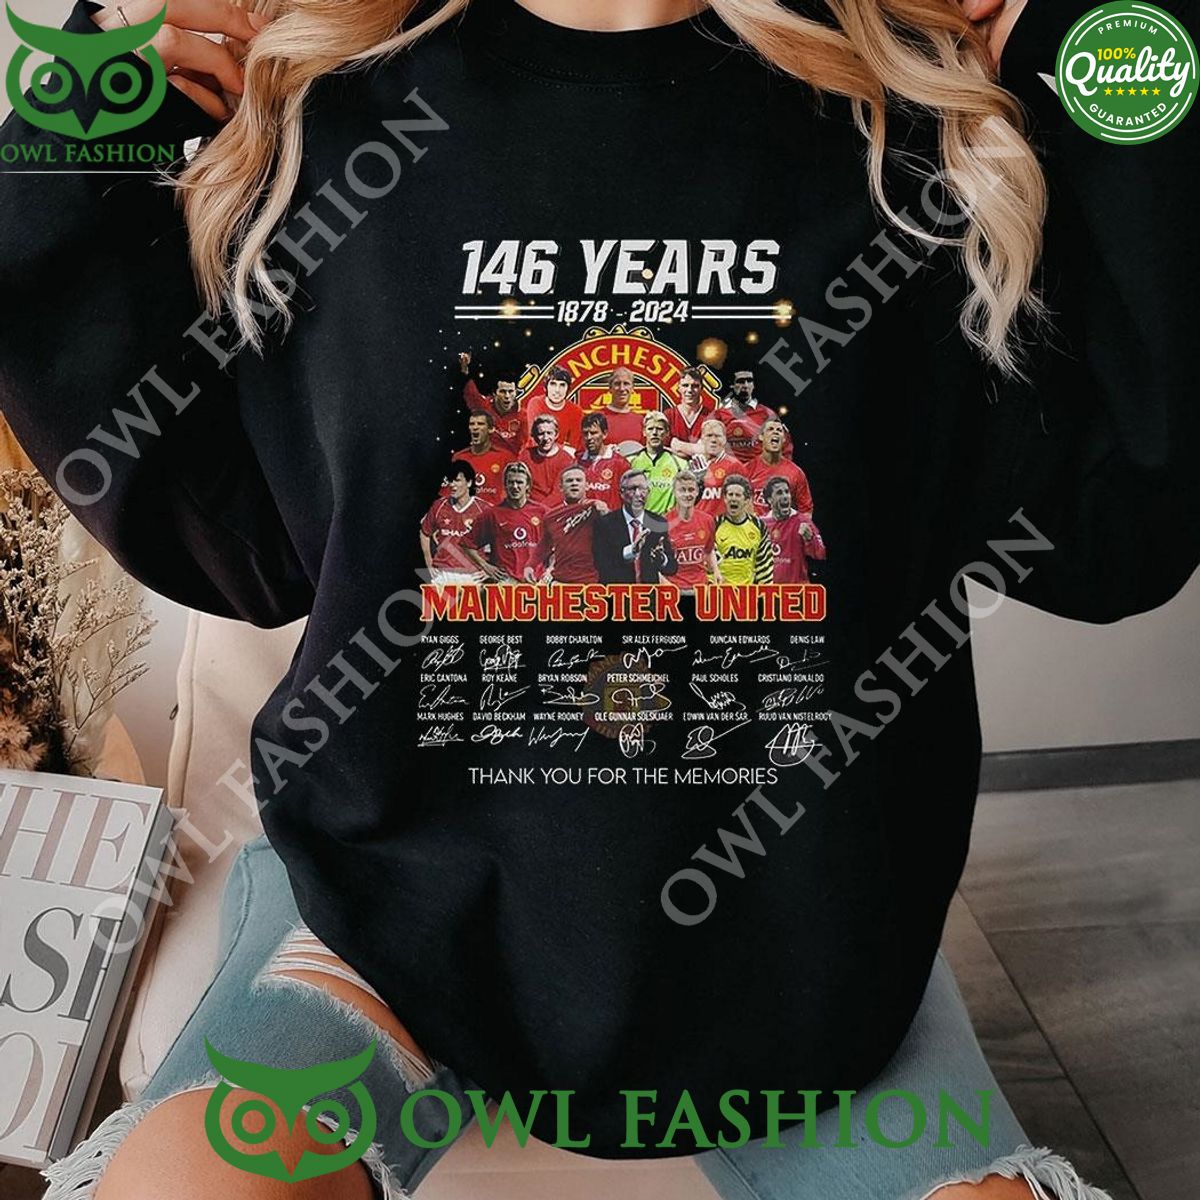 146 years 1878 2024 manchester united thank you for the memories 2d t shirt 1 iUz1Z.jpg